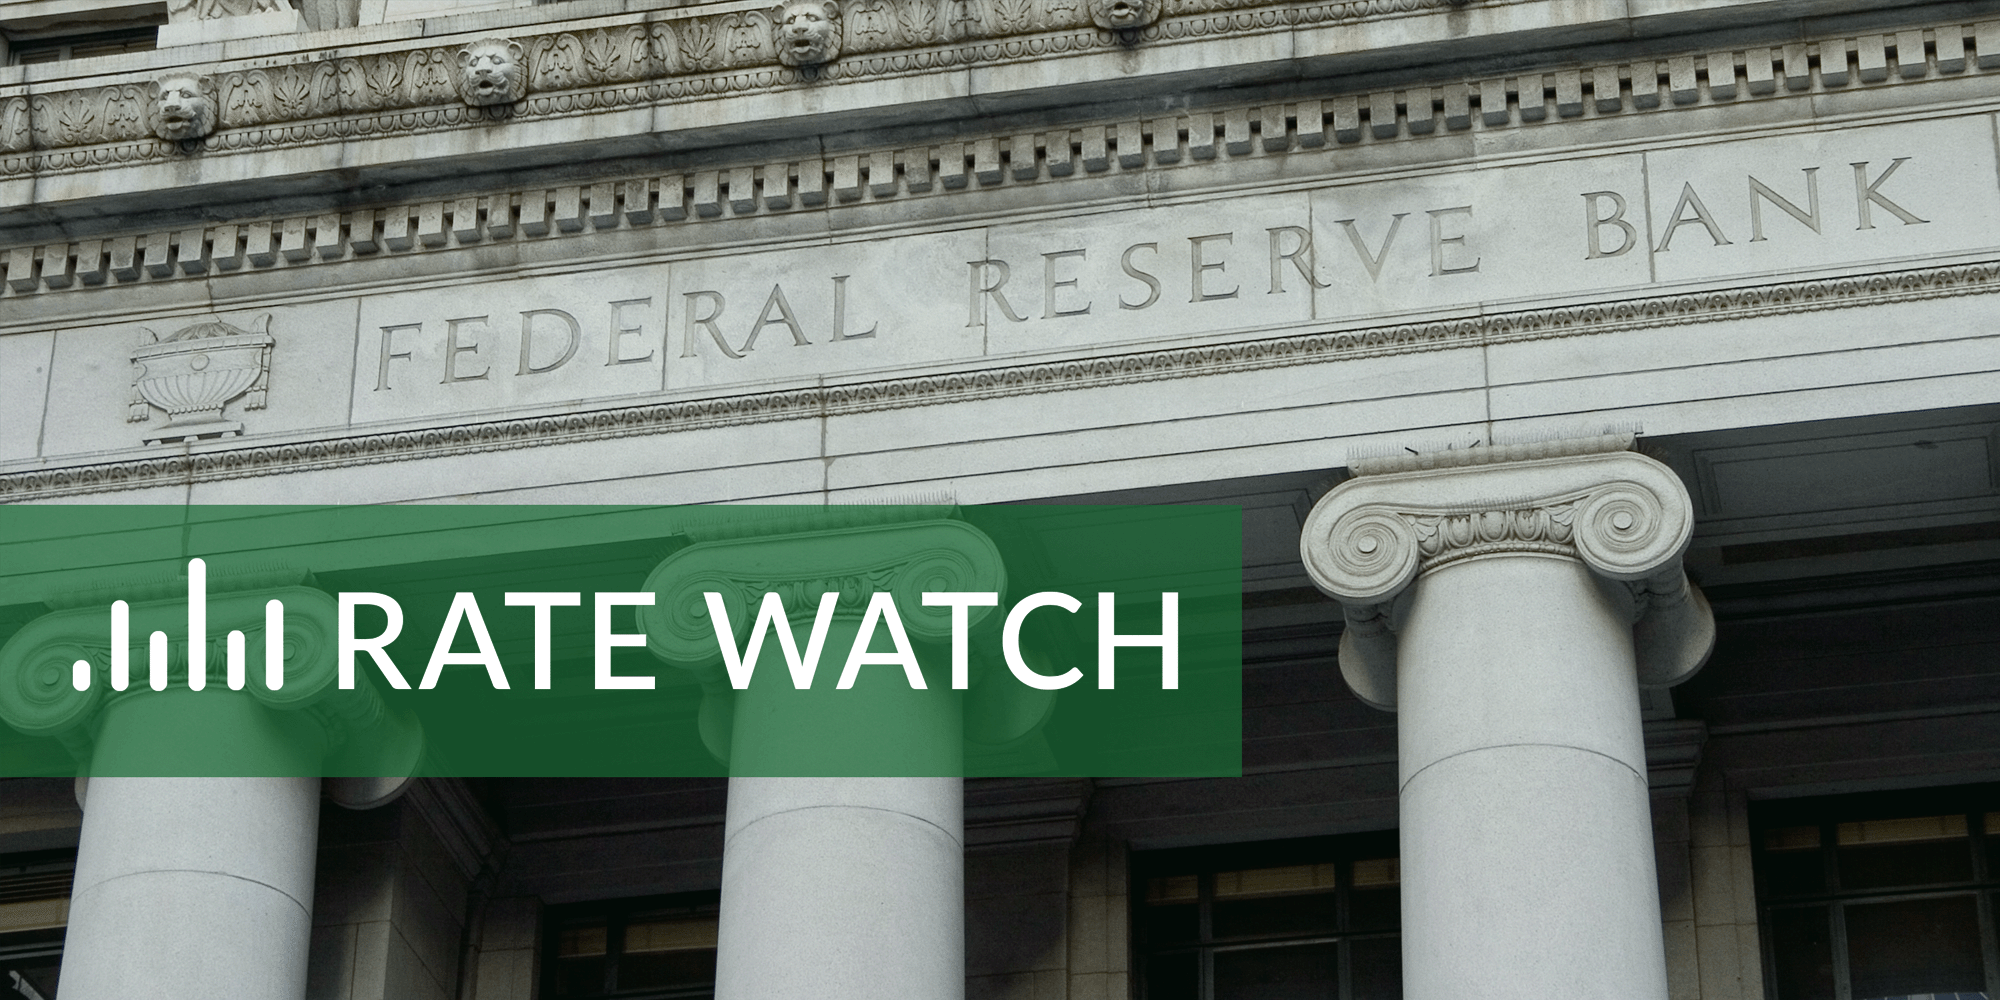 Rate Watch: The Fed Increases Rates Again